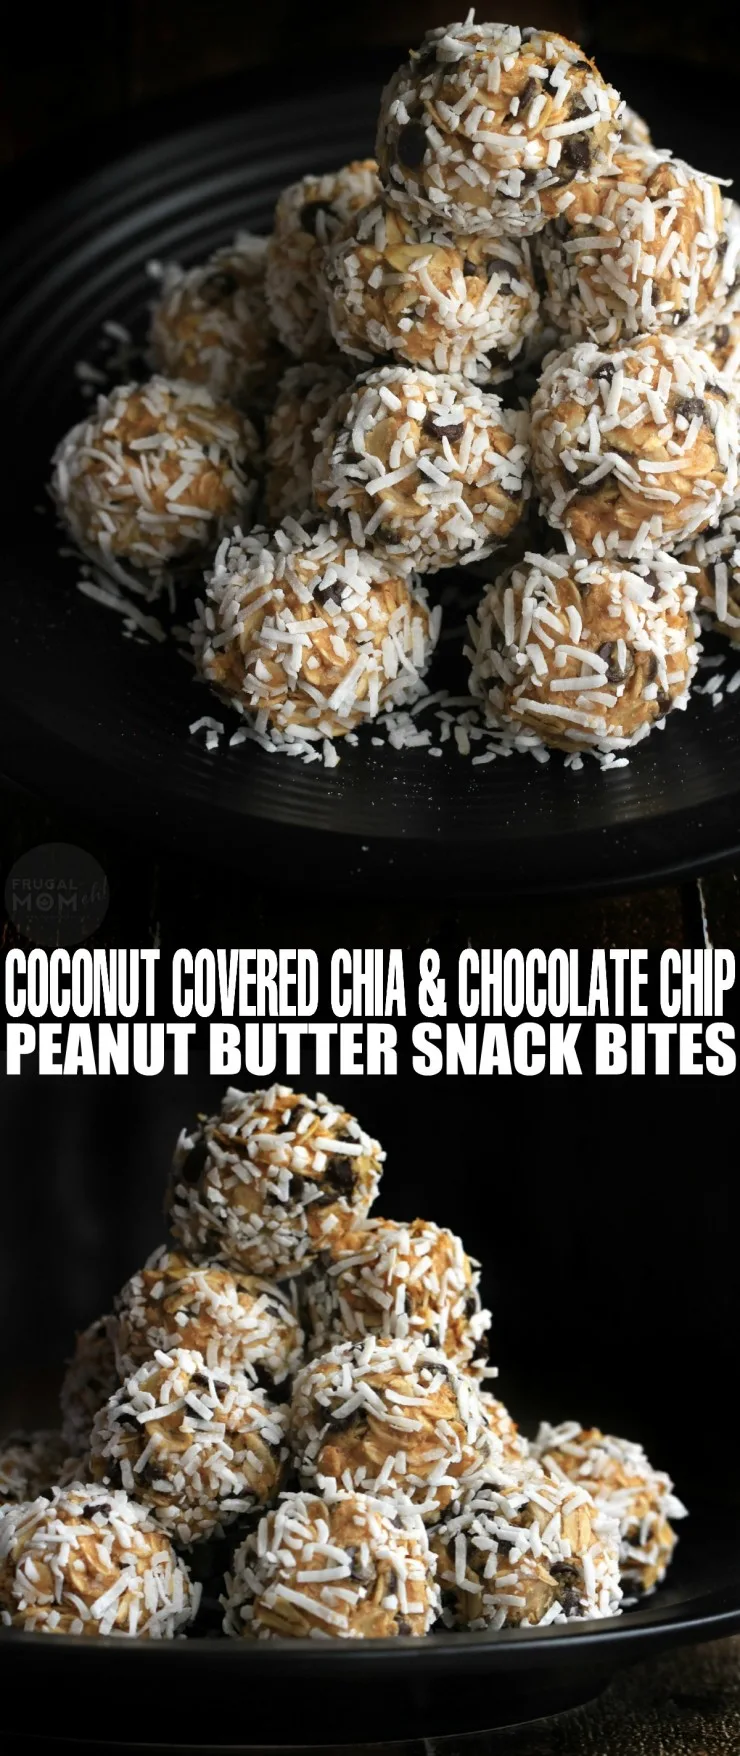 Coconut Covered Chia & Chocolate Chip Peanut Butter Snack Bites are a perfect no-bake energy bite recipe for the whole family!